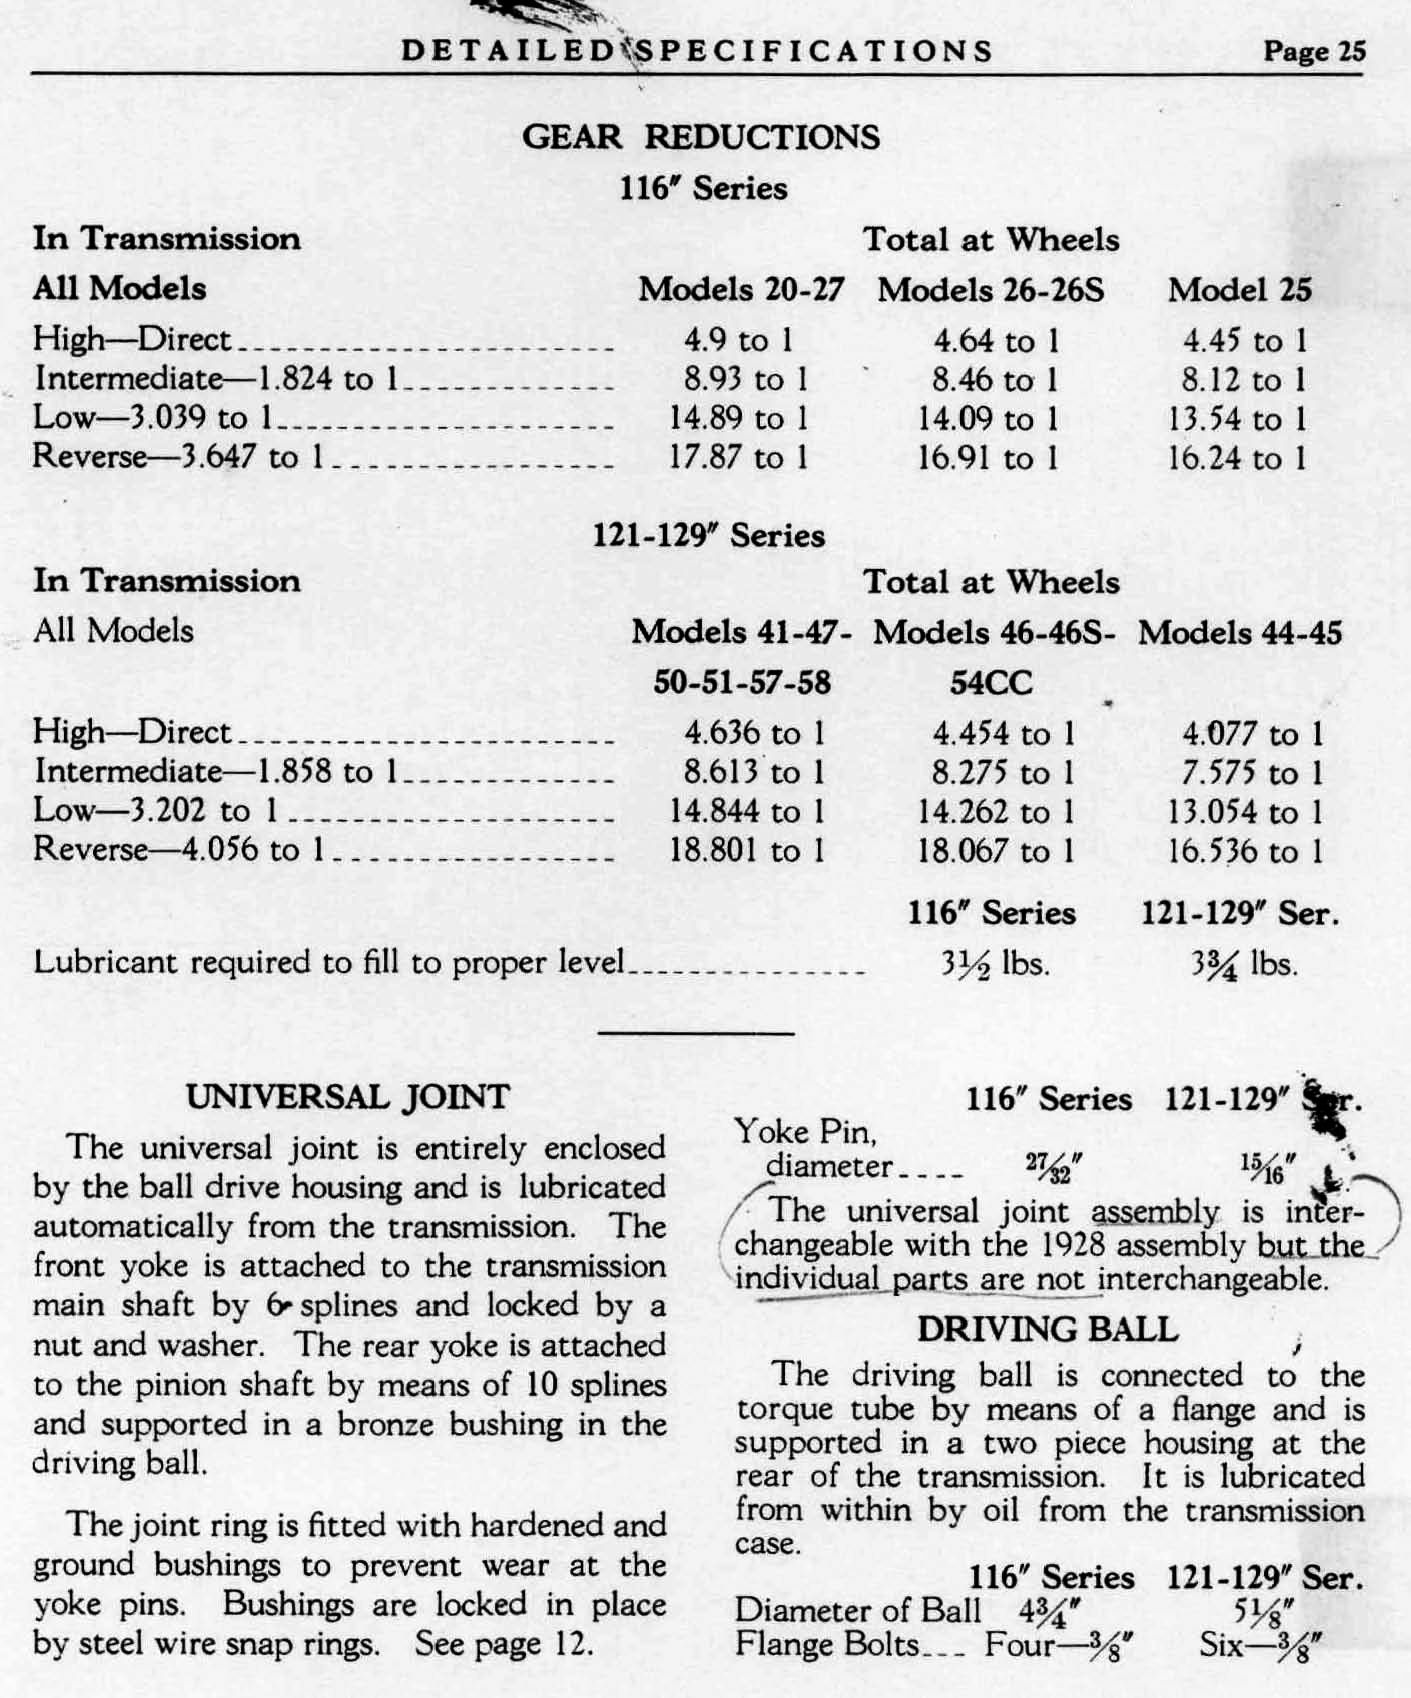 1929 Buick Detailed Specs-25